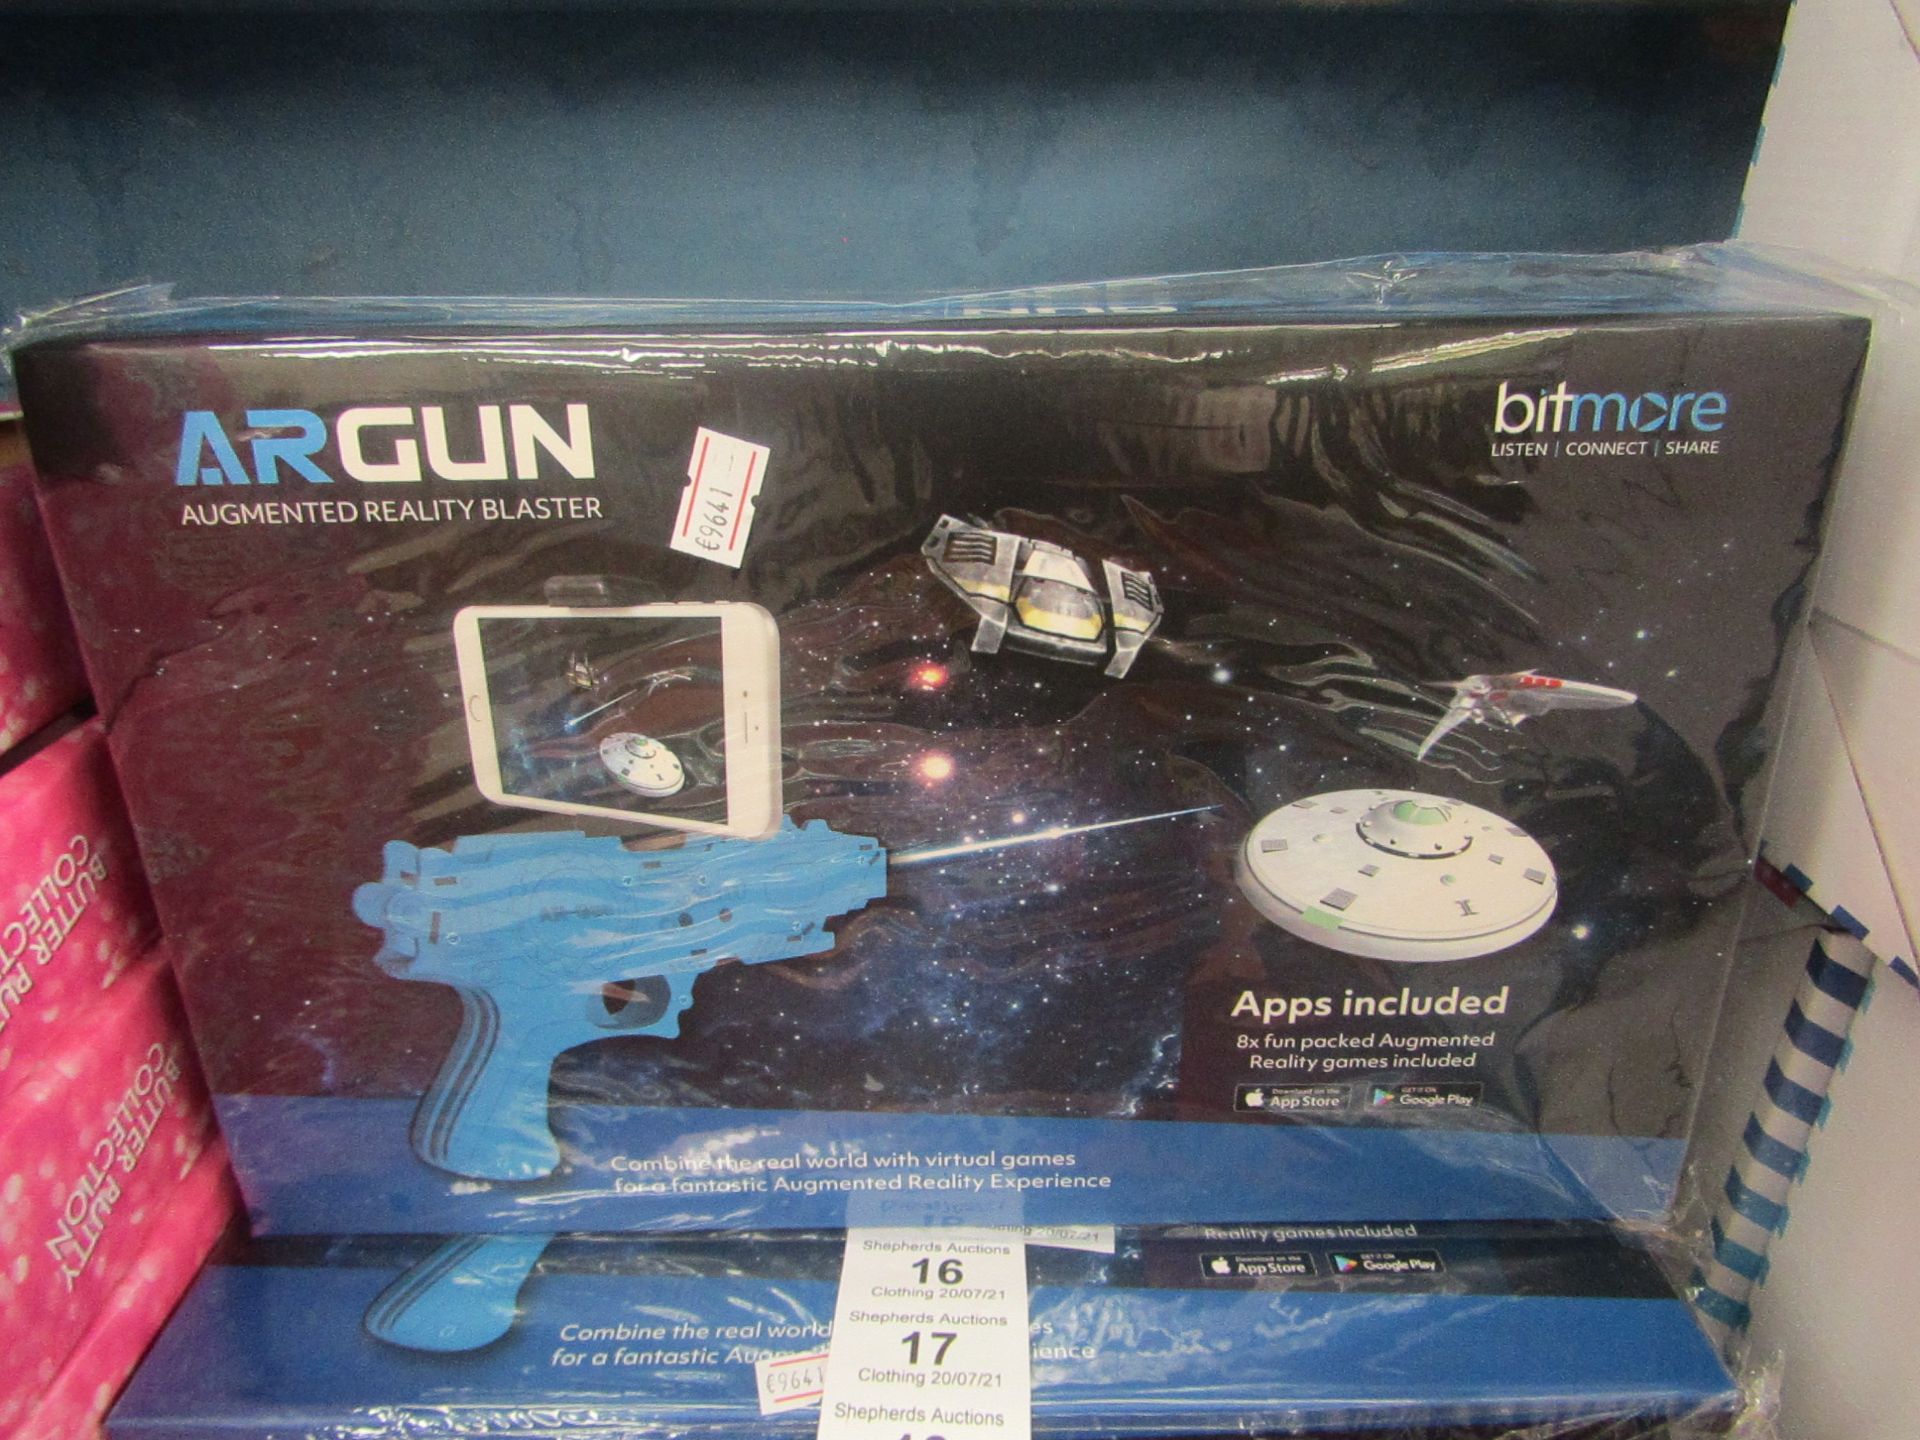 1 x Bitmore ARGun Augmented Reality Blaster RRP £25 on ebay new & packaged